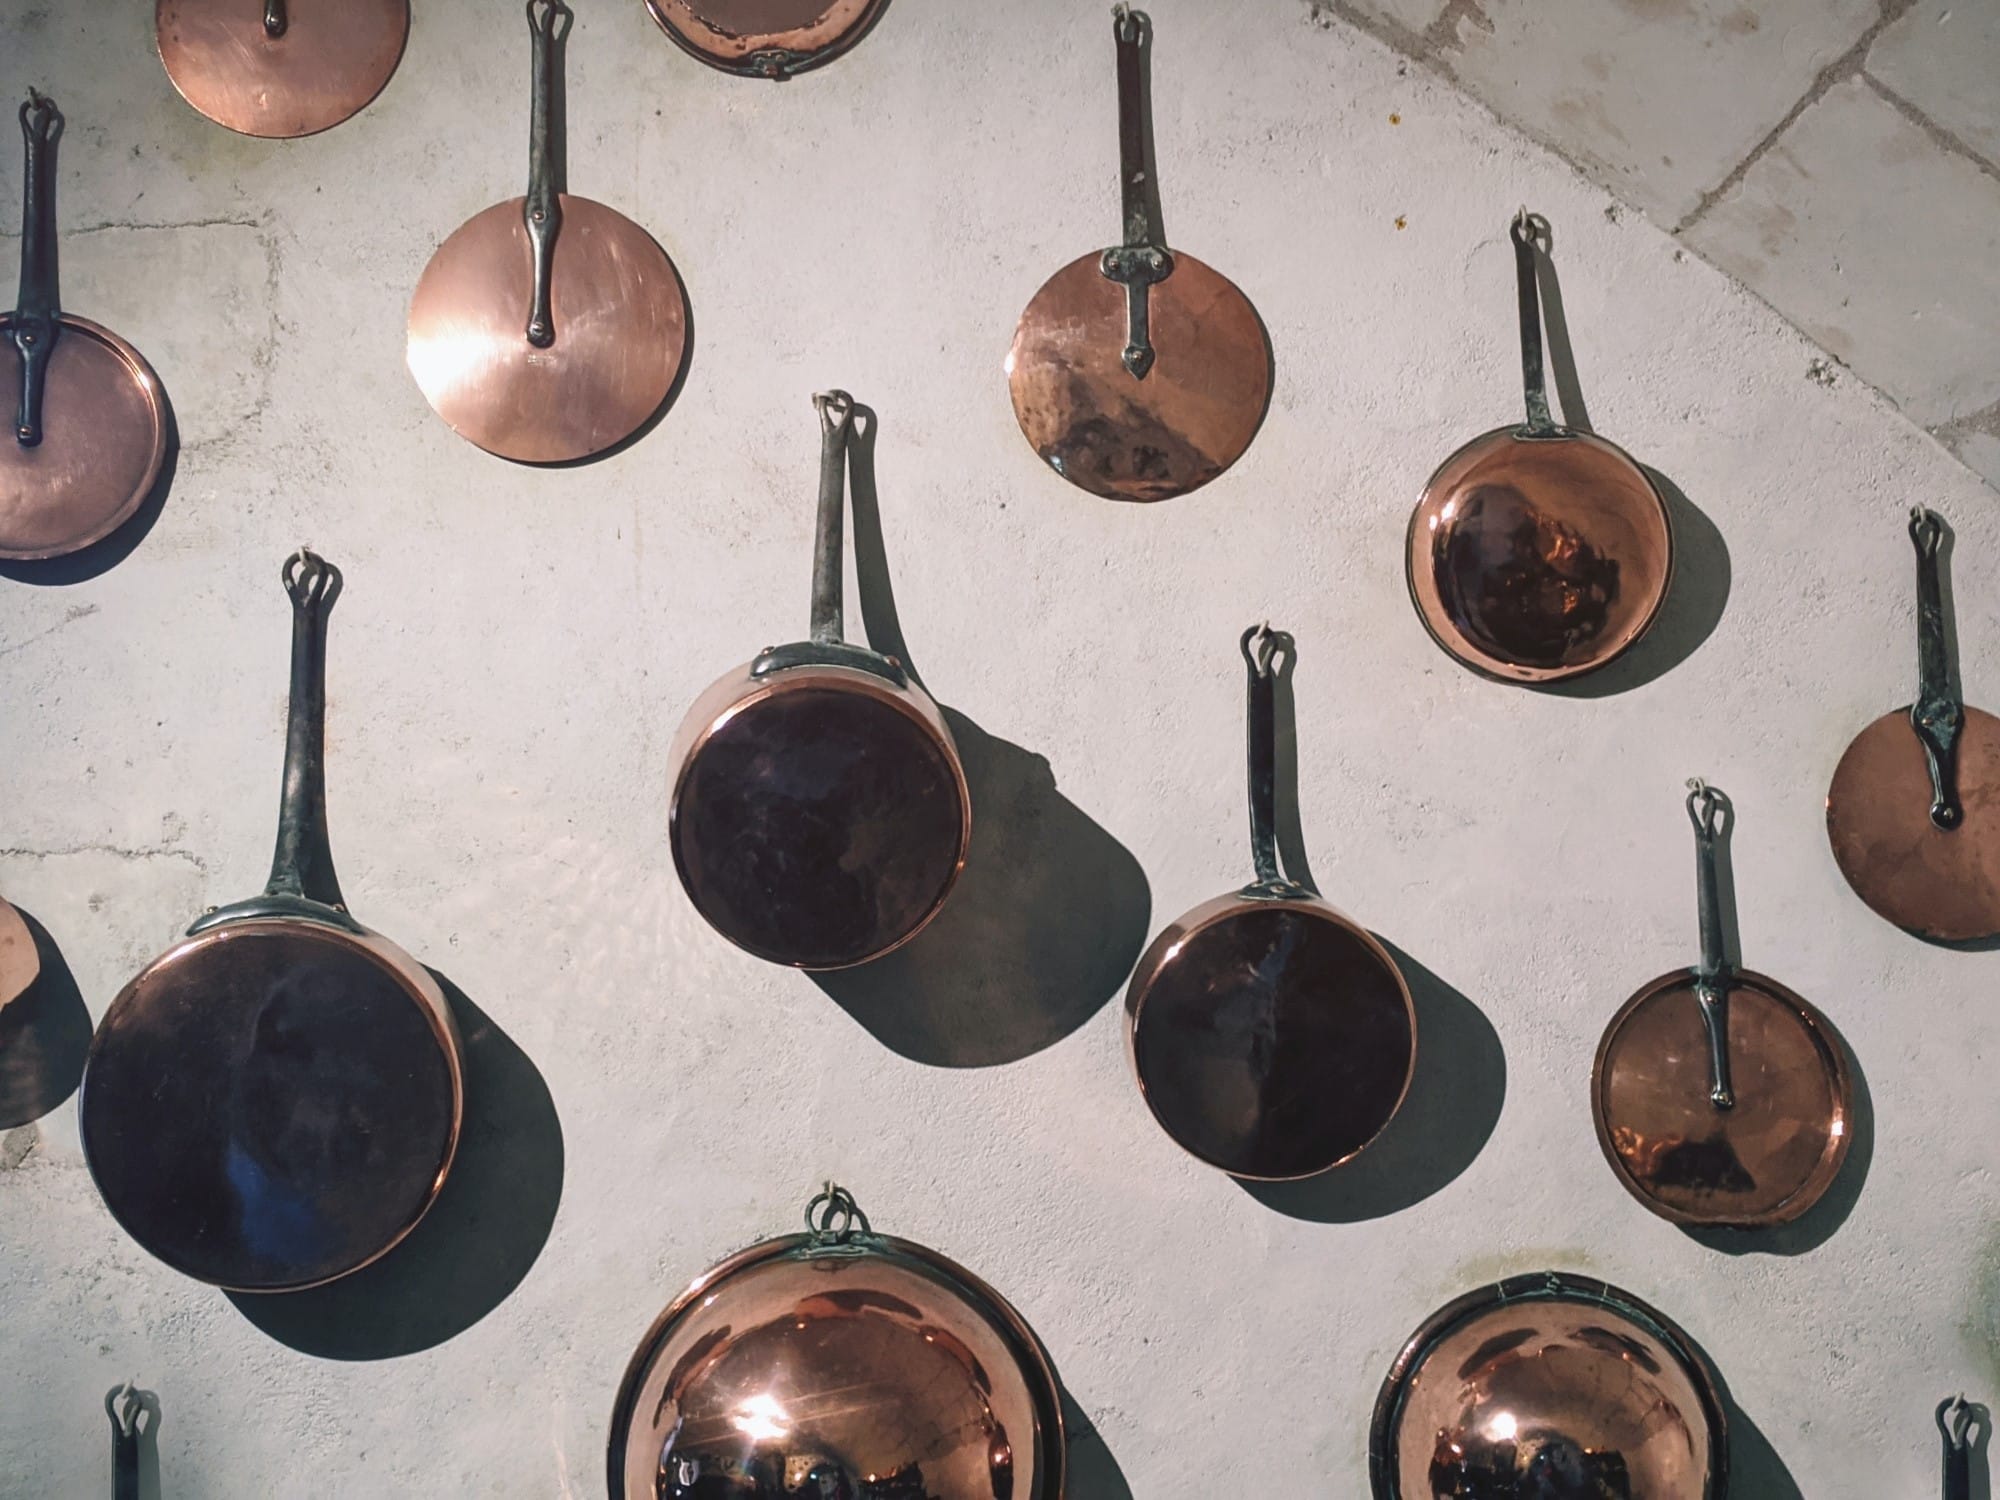 Can you use copper pans in ovens? - HomeDIYHQ